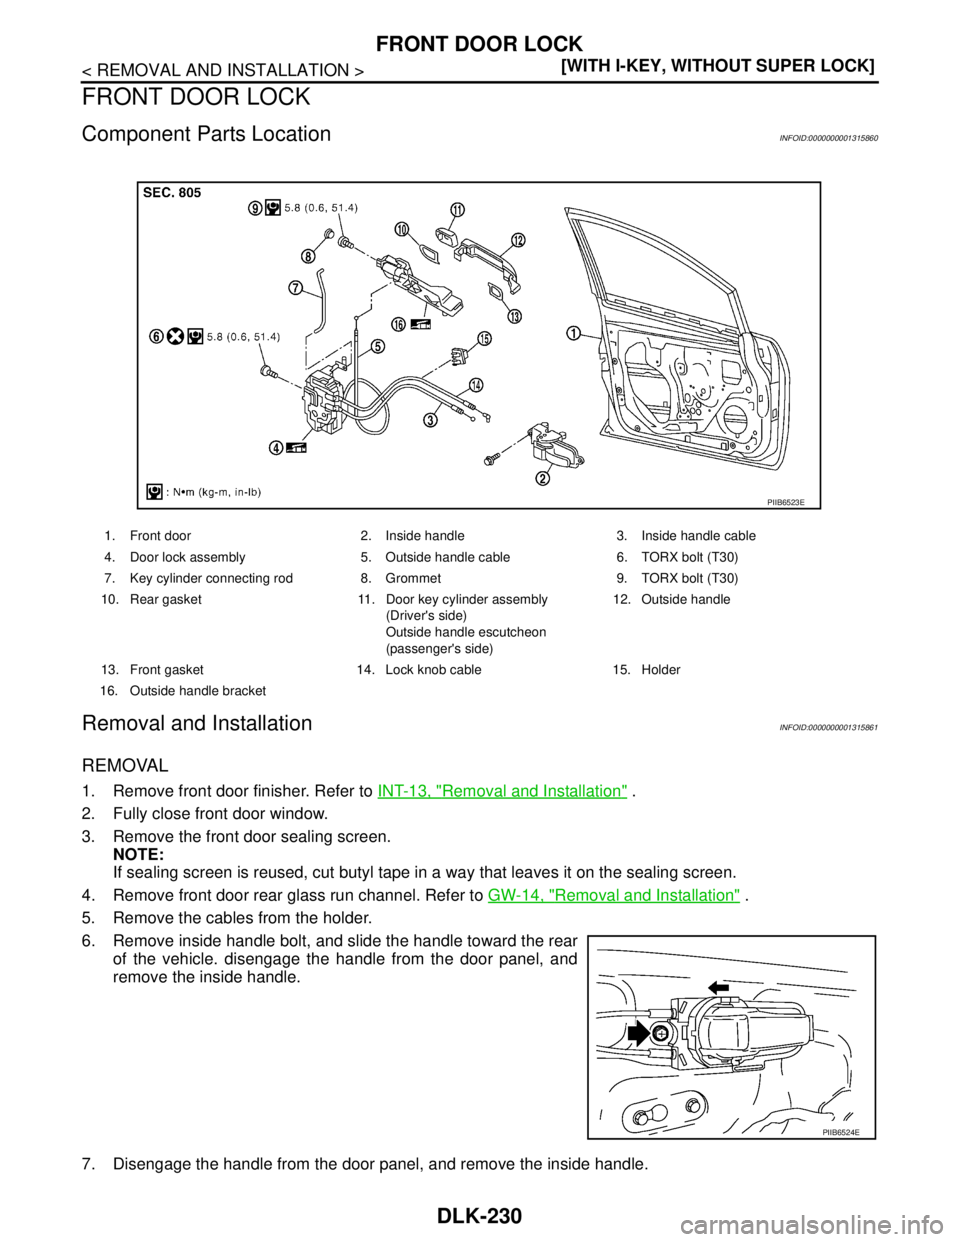 NISSAN TIIDA 2007  Service Repair Manual DLK-230
< REMOVAL AND INSTALLATION >[WITH I-KEY, WITHOUT SUPER LOCK]
FRONT DOOR LOCK
FRONT DOOR LOCK
Component Parts LocationINFOID:0000000001315860
Removal and InstallationINFOID:0000000001315861
REM